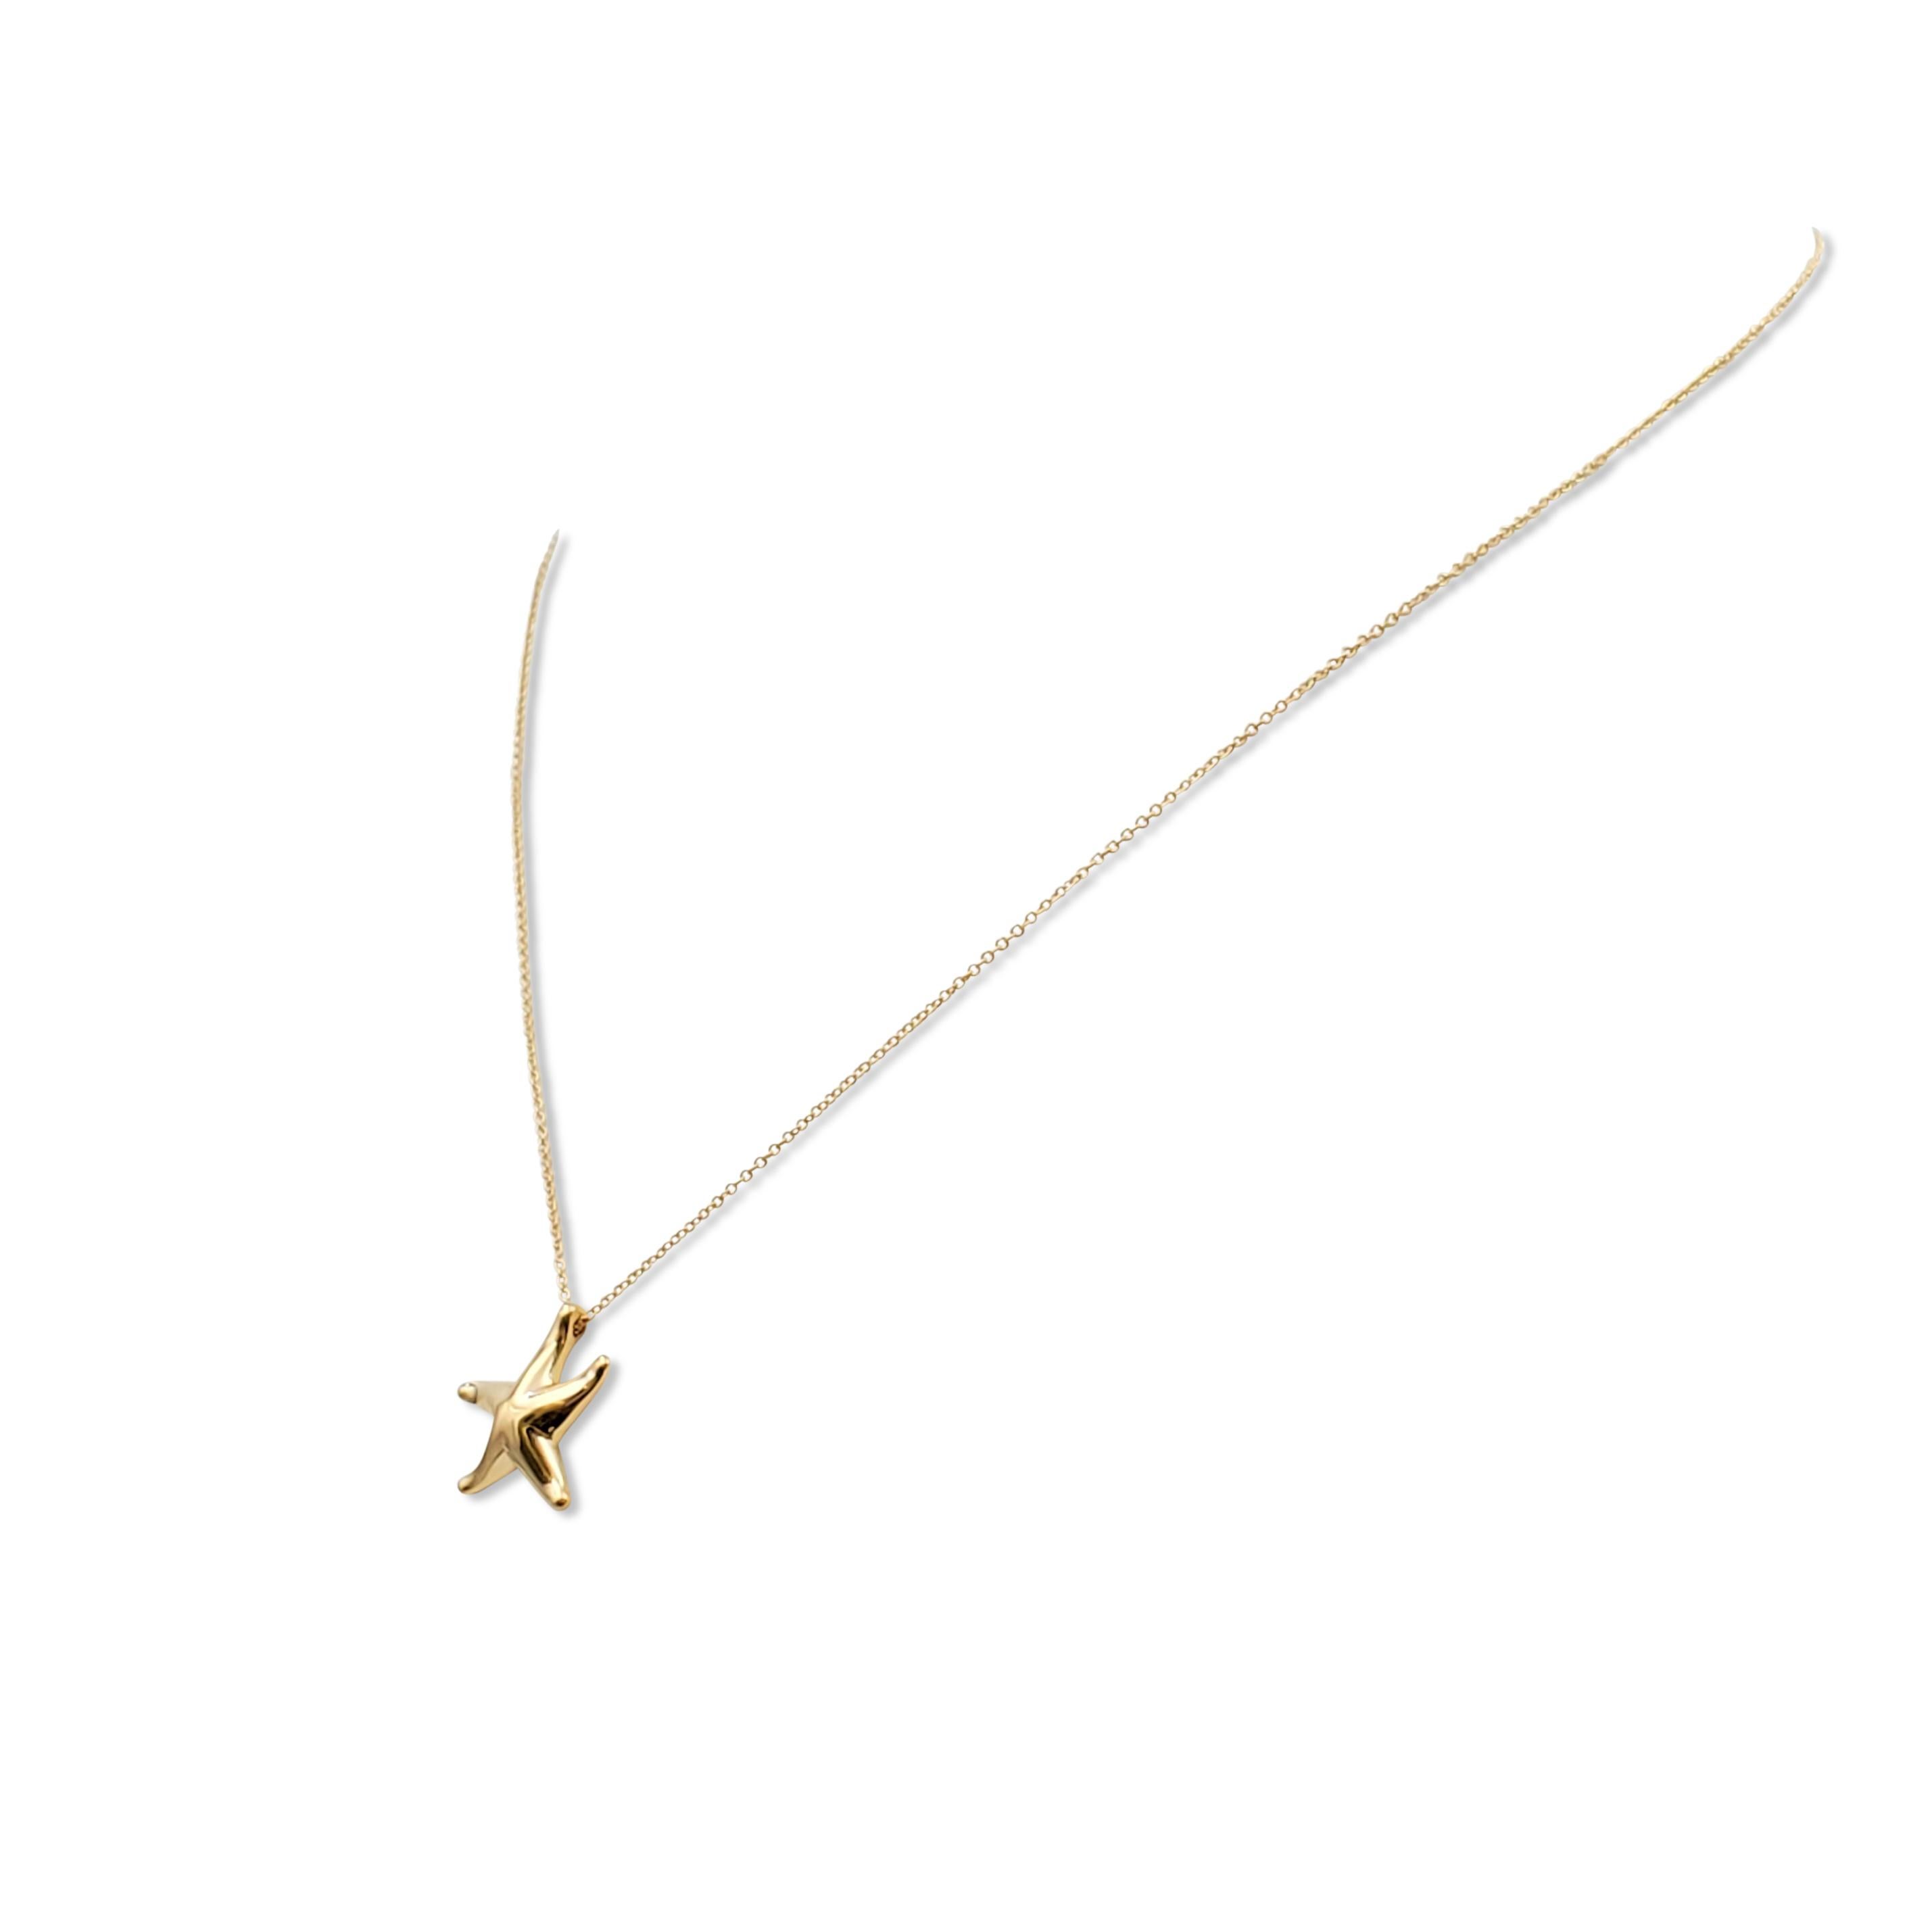 Authentic Elsa Peretti for Tiffany & Co. starfish pendant crafted in 18 karat yellow gold which hangs from a delicate Tiffany & Co. chain. Signed Tiffany & Co., Peretti,  750, Spain. The chain measures 16 inches in length. Not presented with the